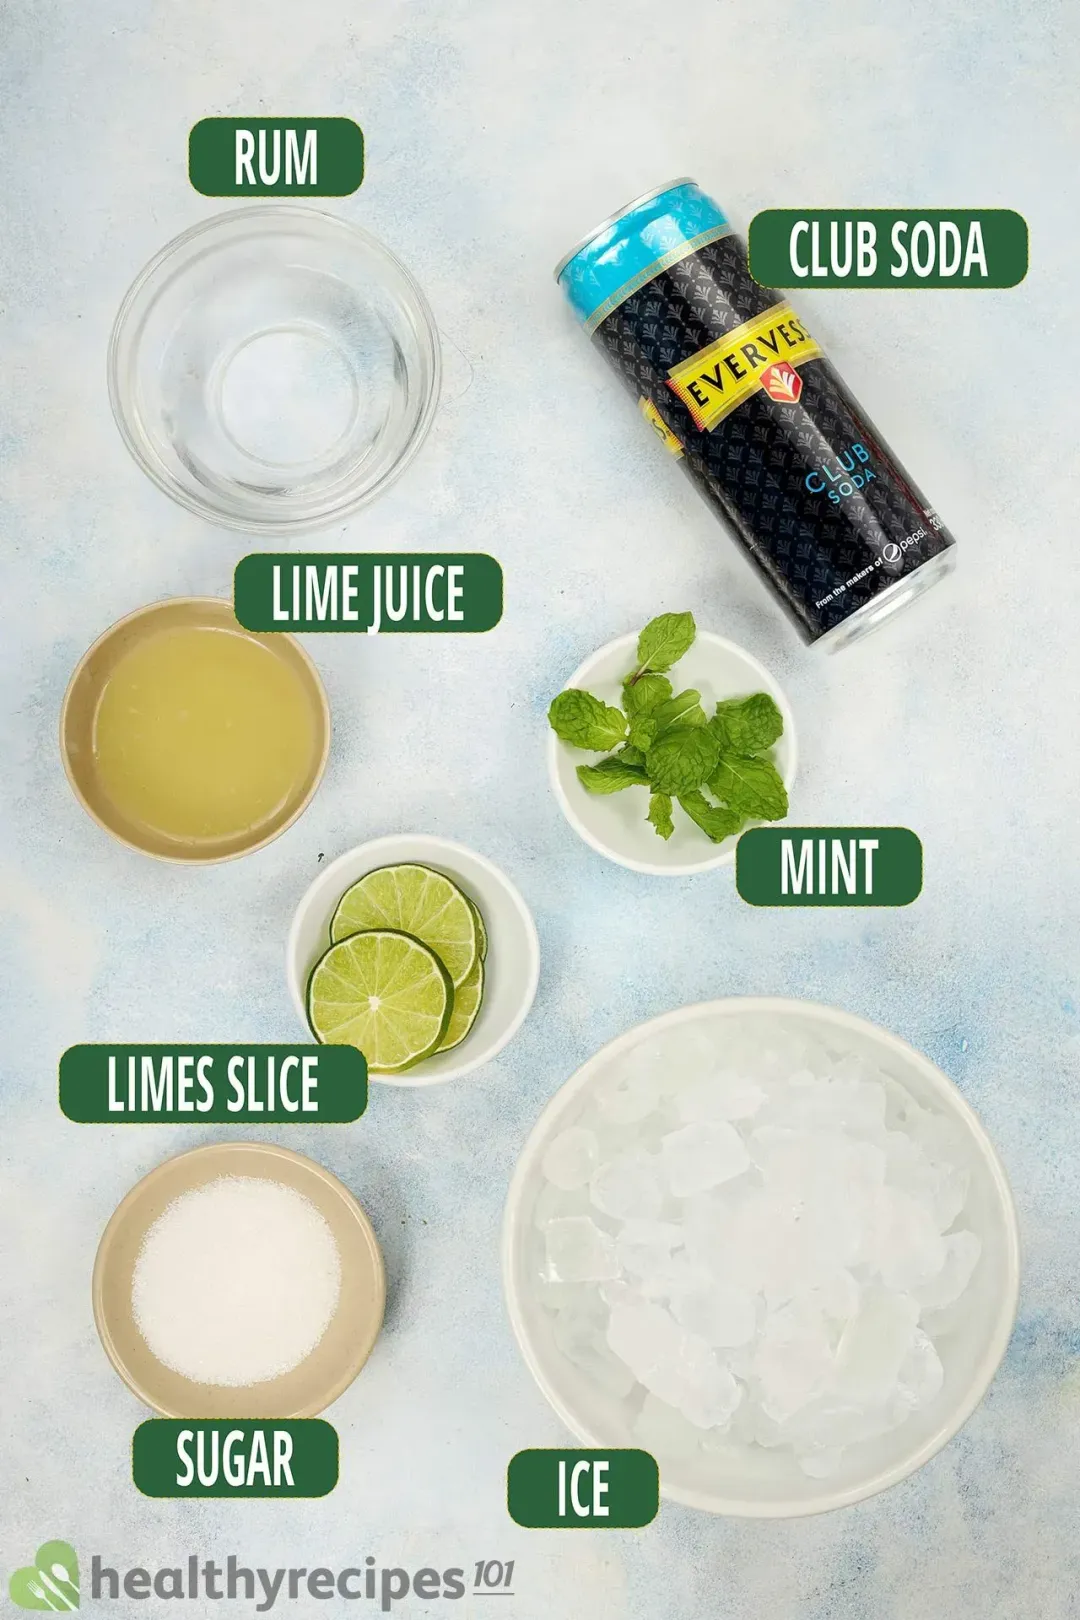 Ingredients in separate bowls: rum, lime juice, lime wheels, sugar, ice nuggets, mints ,and a can of 